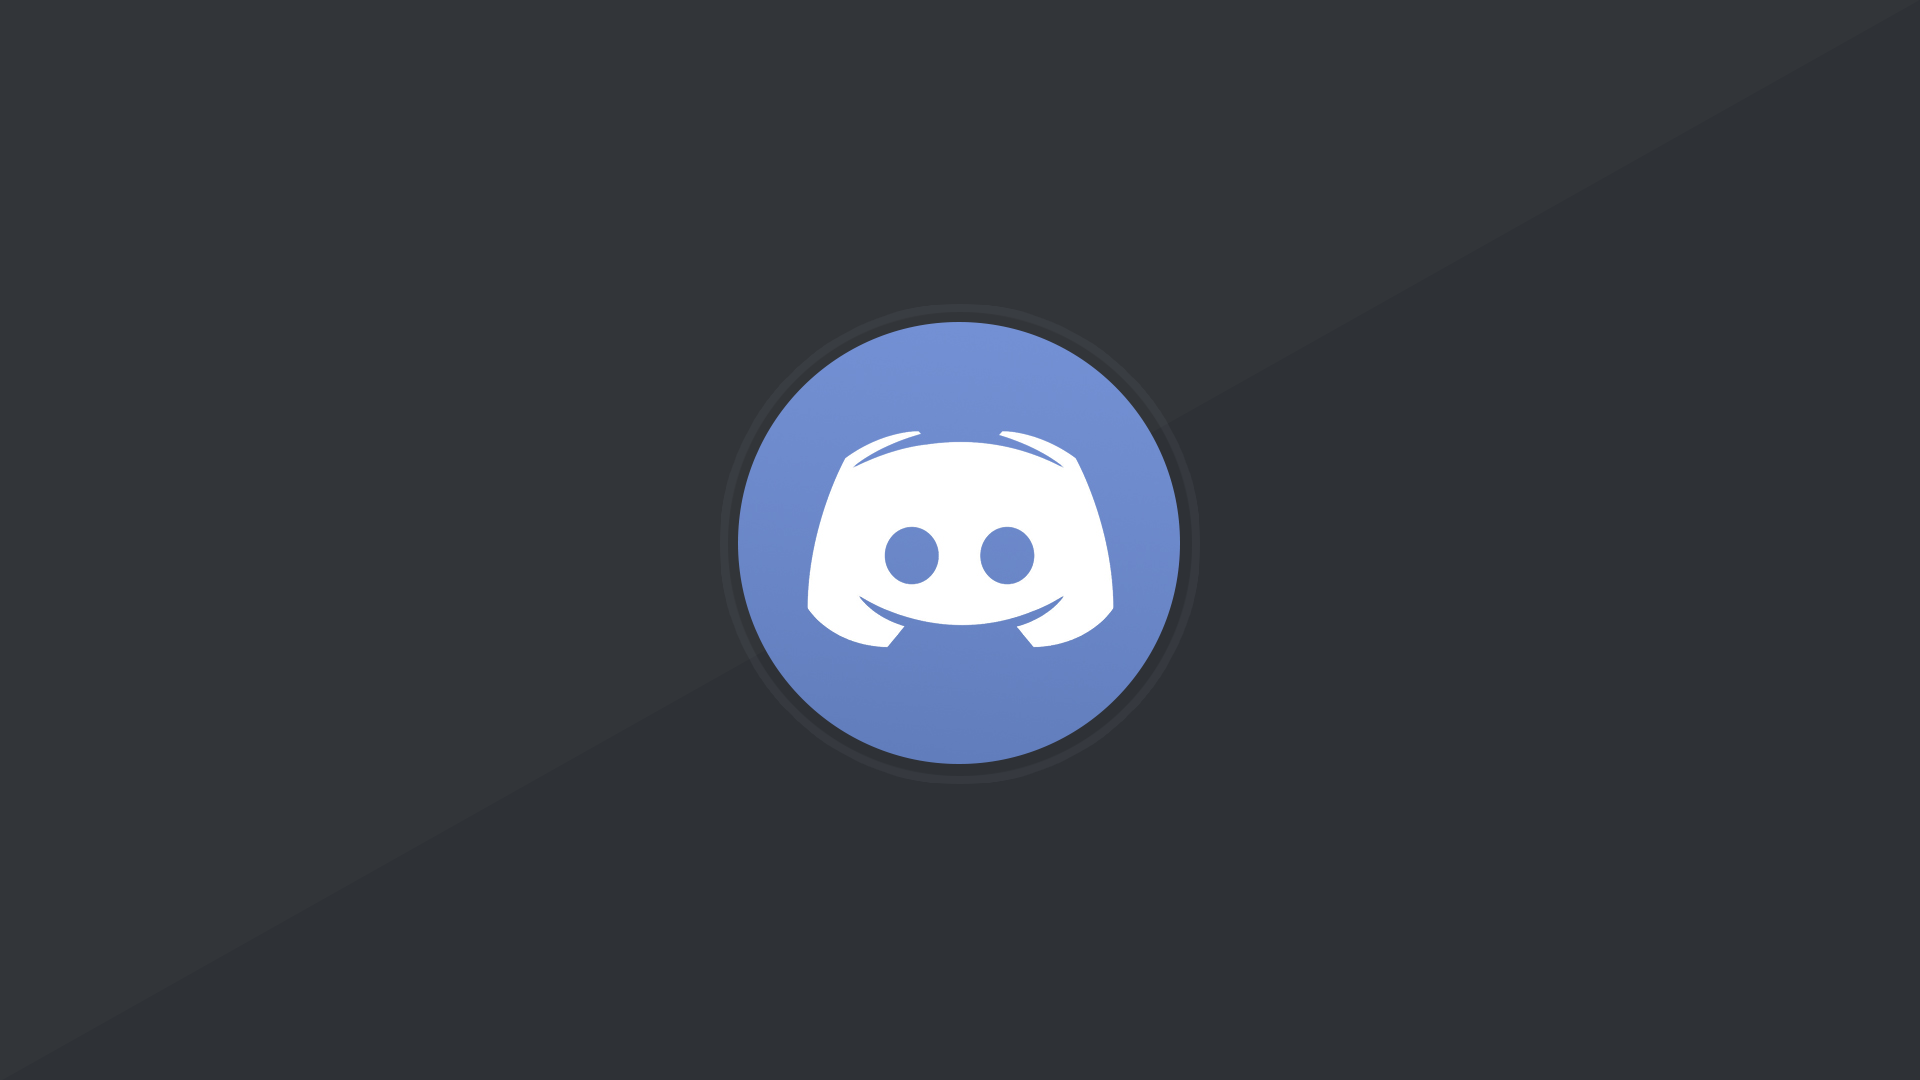 How to add games to discord